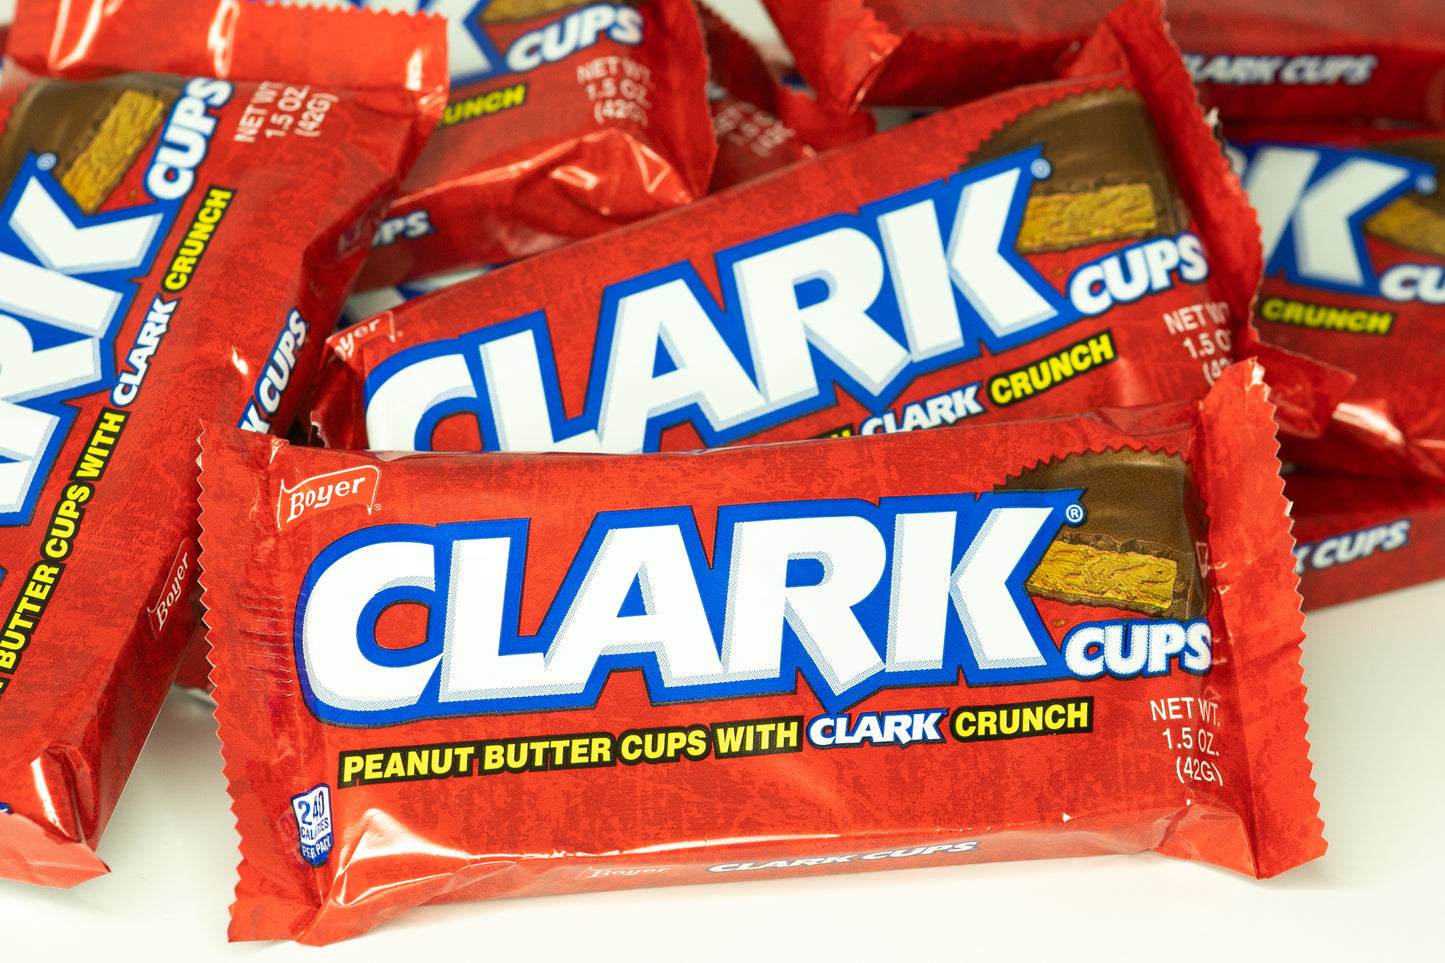 Clark Cup 2 pack - 24 count box